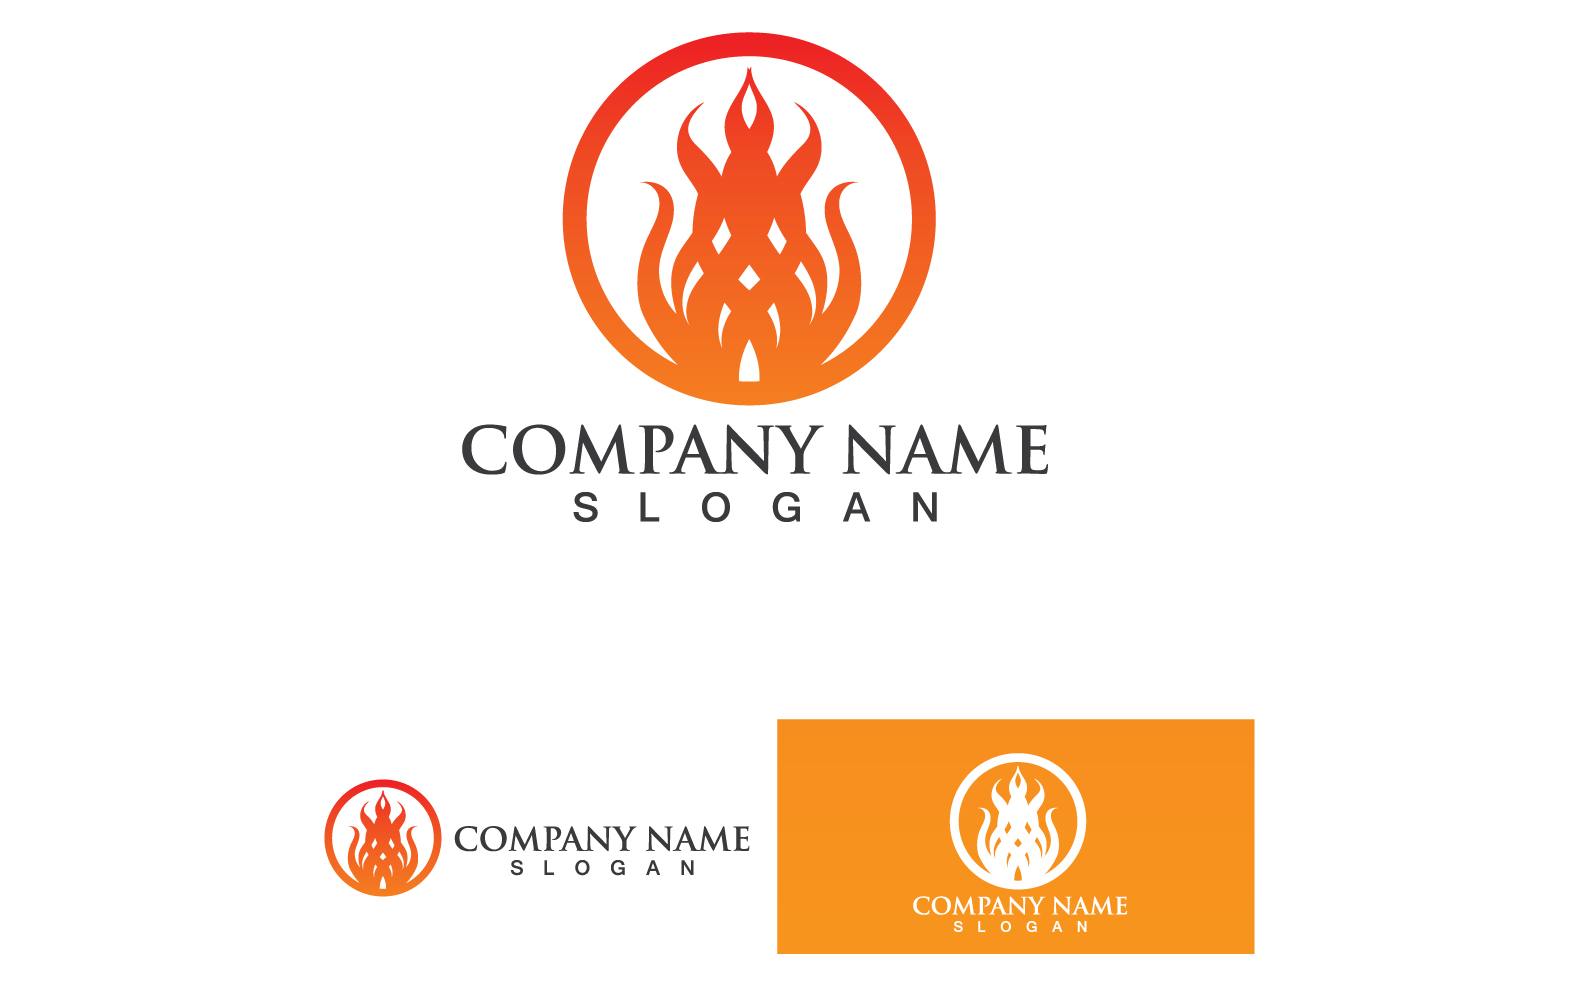 Wing Bird Business Logo Your Company Name V2